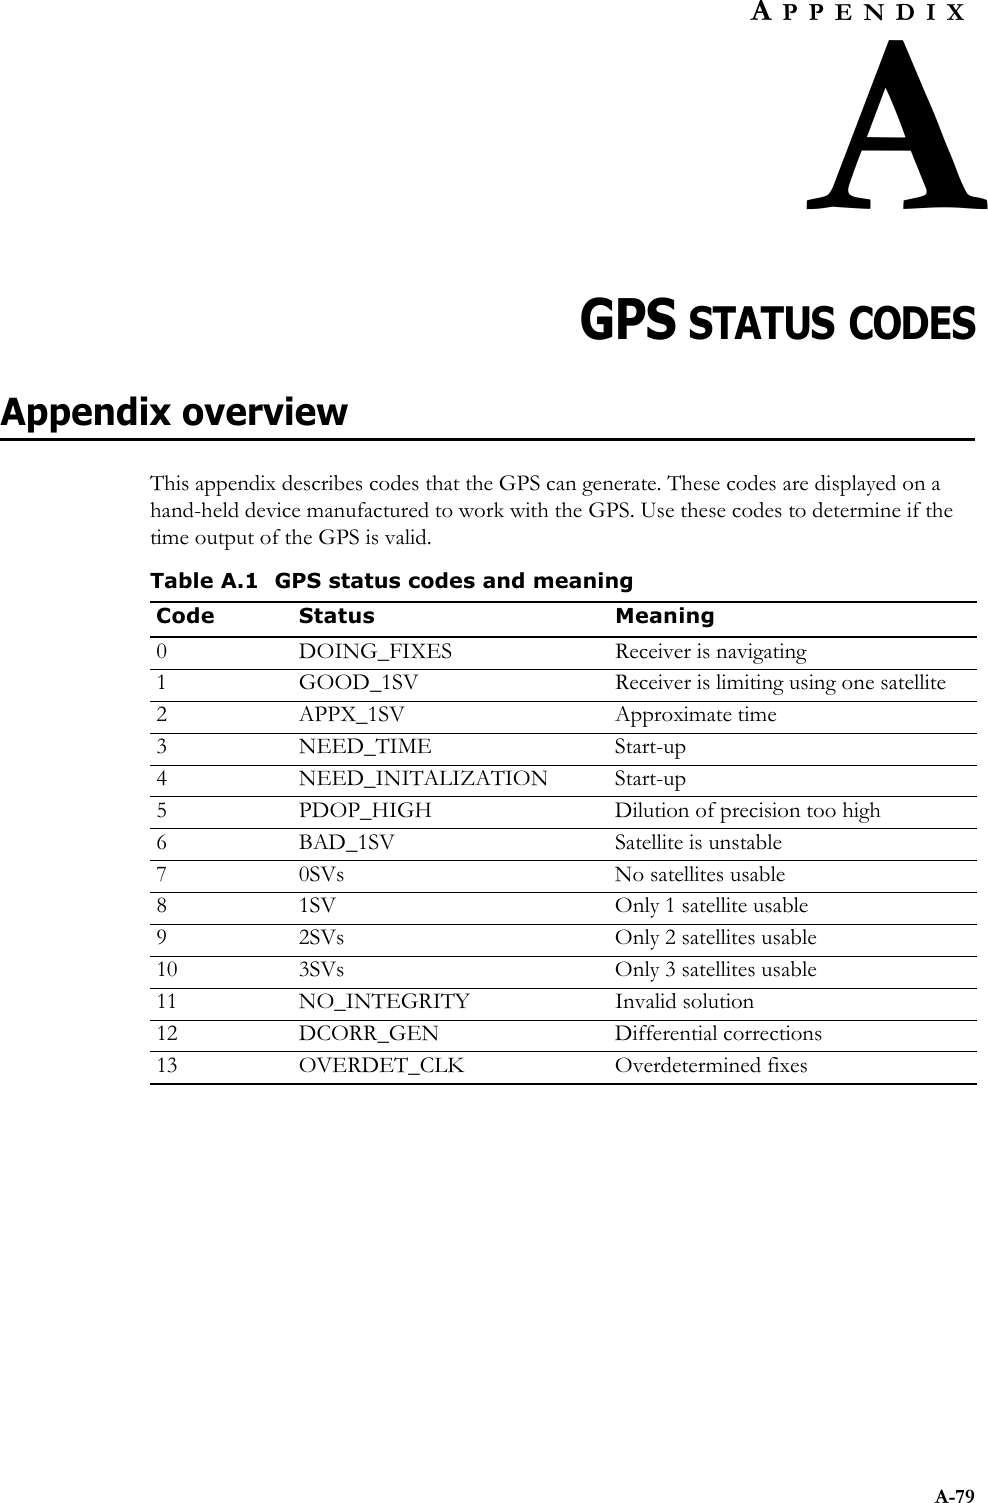 A-79APPENDIXACHAPTER 0GPS STATUS CODESAppendix overviewThis appendix describes codes that the GPS can generate. These codes are displayed on a hand-held device manufactured to work with the GPS. Use these codes to determine if the time output of the GPS is valid. Table A.1 GPS status codes and meaningCode Status Meaning0 DOING_FIXES Receiver is navigating1 GOOD_1SV Receiver is limiting using one satellite2 APPX_1SV Approximate time3 NEED_TIME Start-up4 NEED_INITALIZATION Start-up5 PDOP_HIGH Dilution of precision too high6 BAD_1SV Satellite is unstable7 0SVs No satellites usable8 1SV Only 1 satellite usable9 2SVs Only 2 satellites usable10 3SVs Only 3 satellites usable11 NO_INTEGRITY Invalid solution12 DCORR_GEN Differential corrections13 OVERDET_CLK Overdetermined fixes